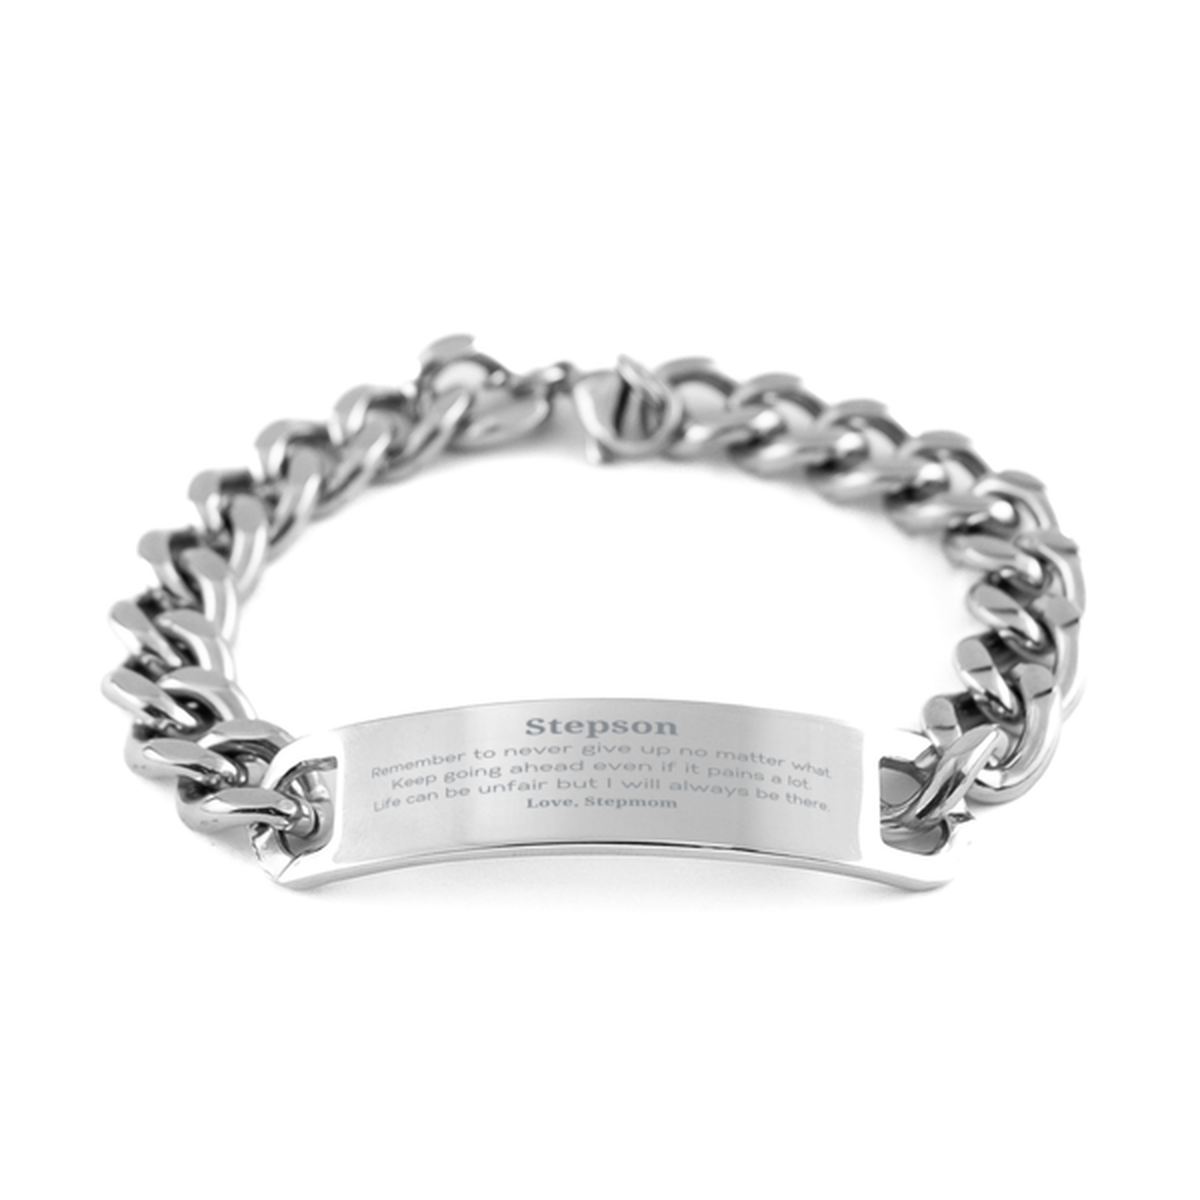 Stepson Motivational Gifts from Stepmom, Remember to never give up no matter what, Inspirational Birthday Cuban Chain Stainless Steel Bracelet for Stepson